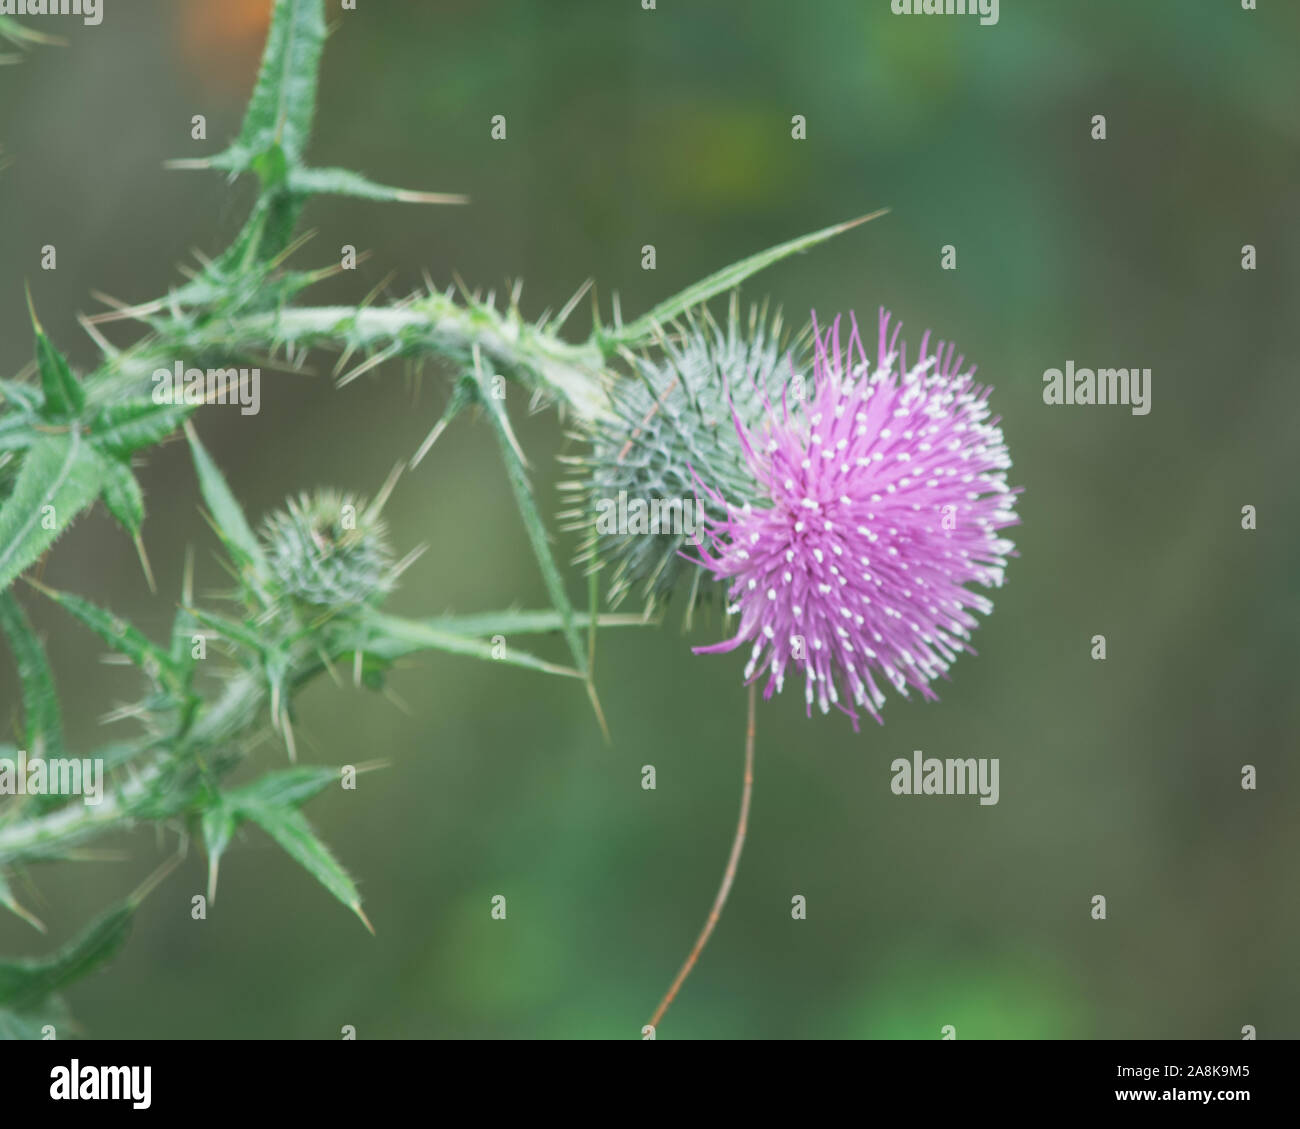 Spear or Scotch Thistle plant, pointy pink or mauve flower, Australia Stock Photo